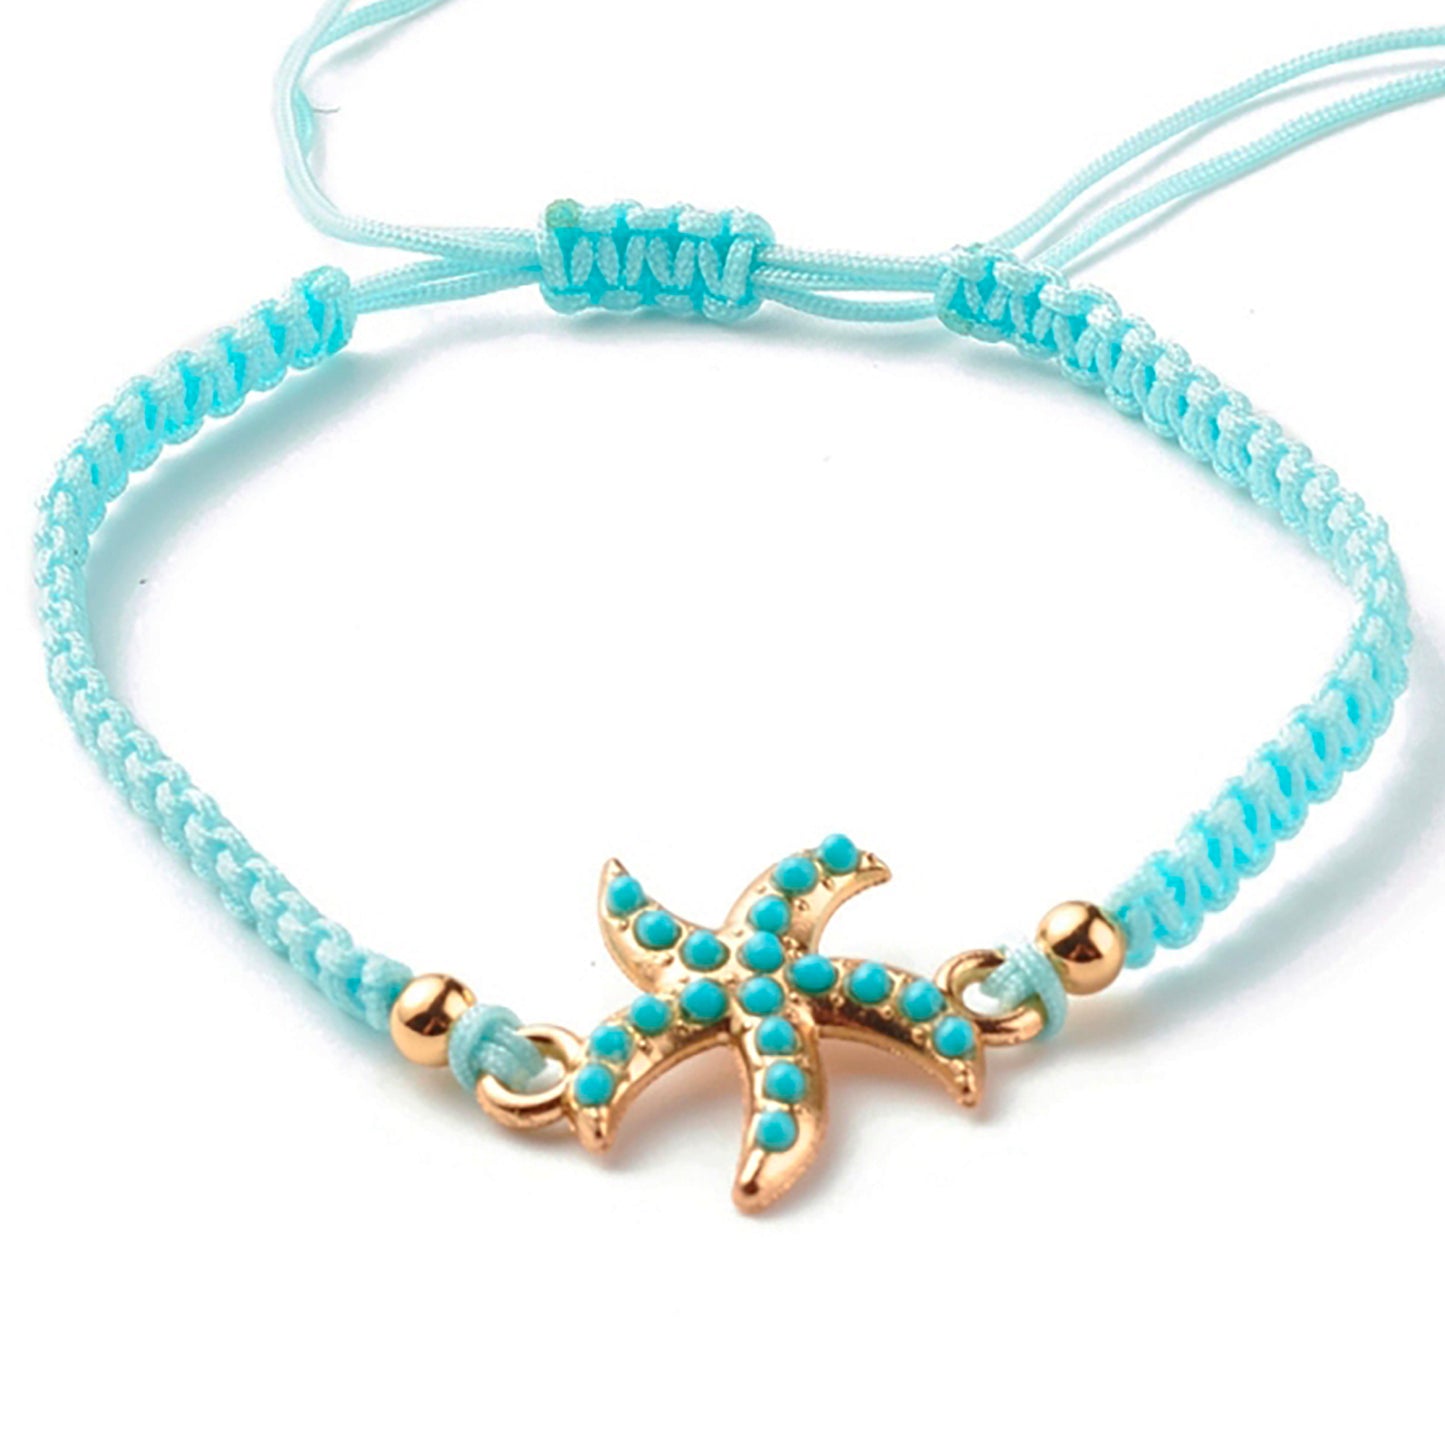 Set of 5 Summer Beach Bracelets with Starfish Charm - Perfect Accessory for Summer Party or Holidays on the Beach